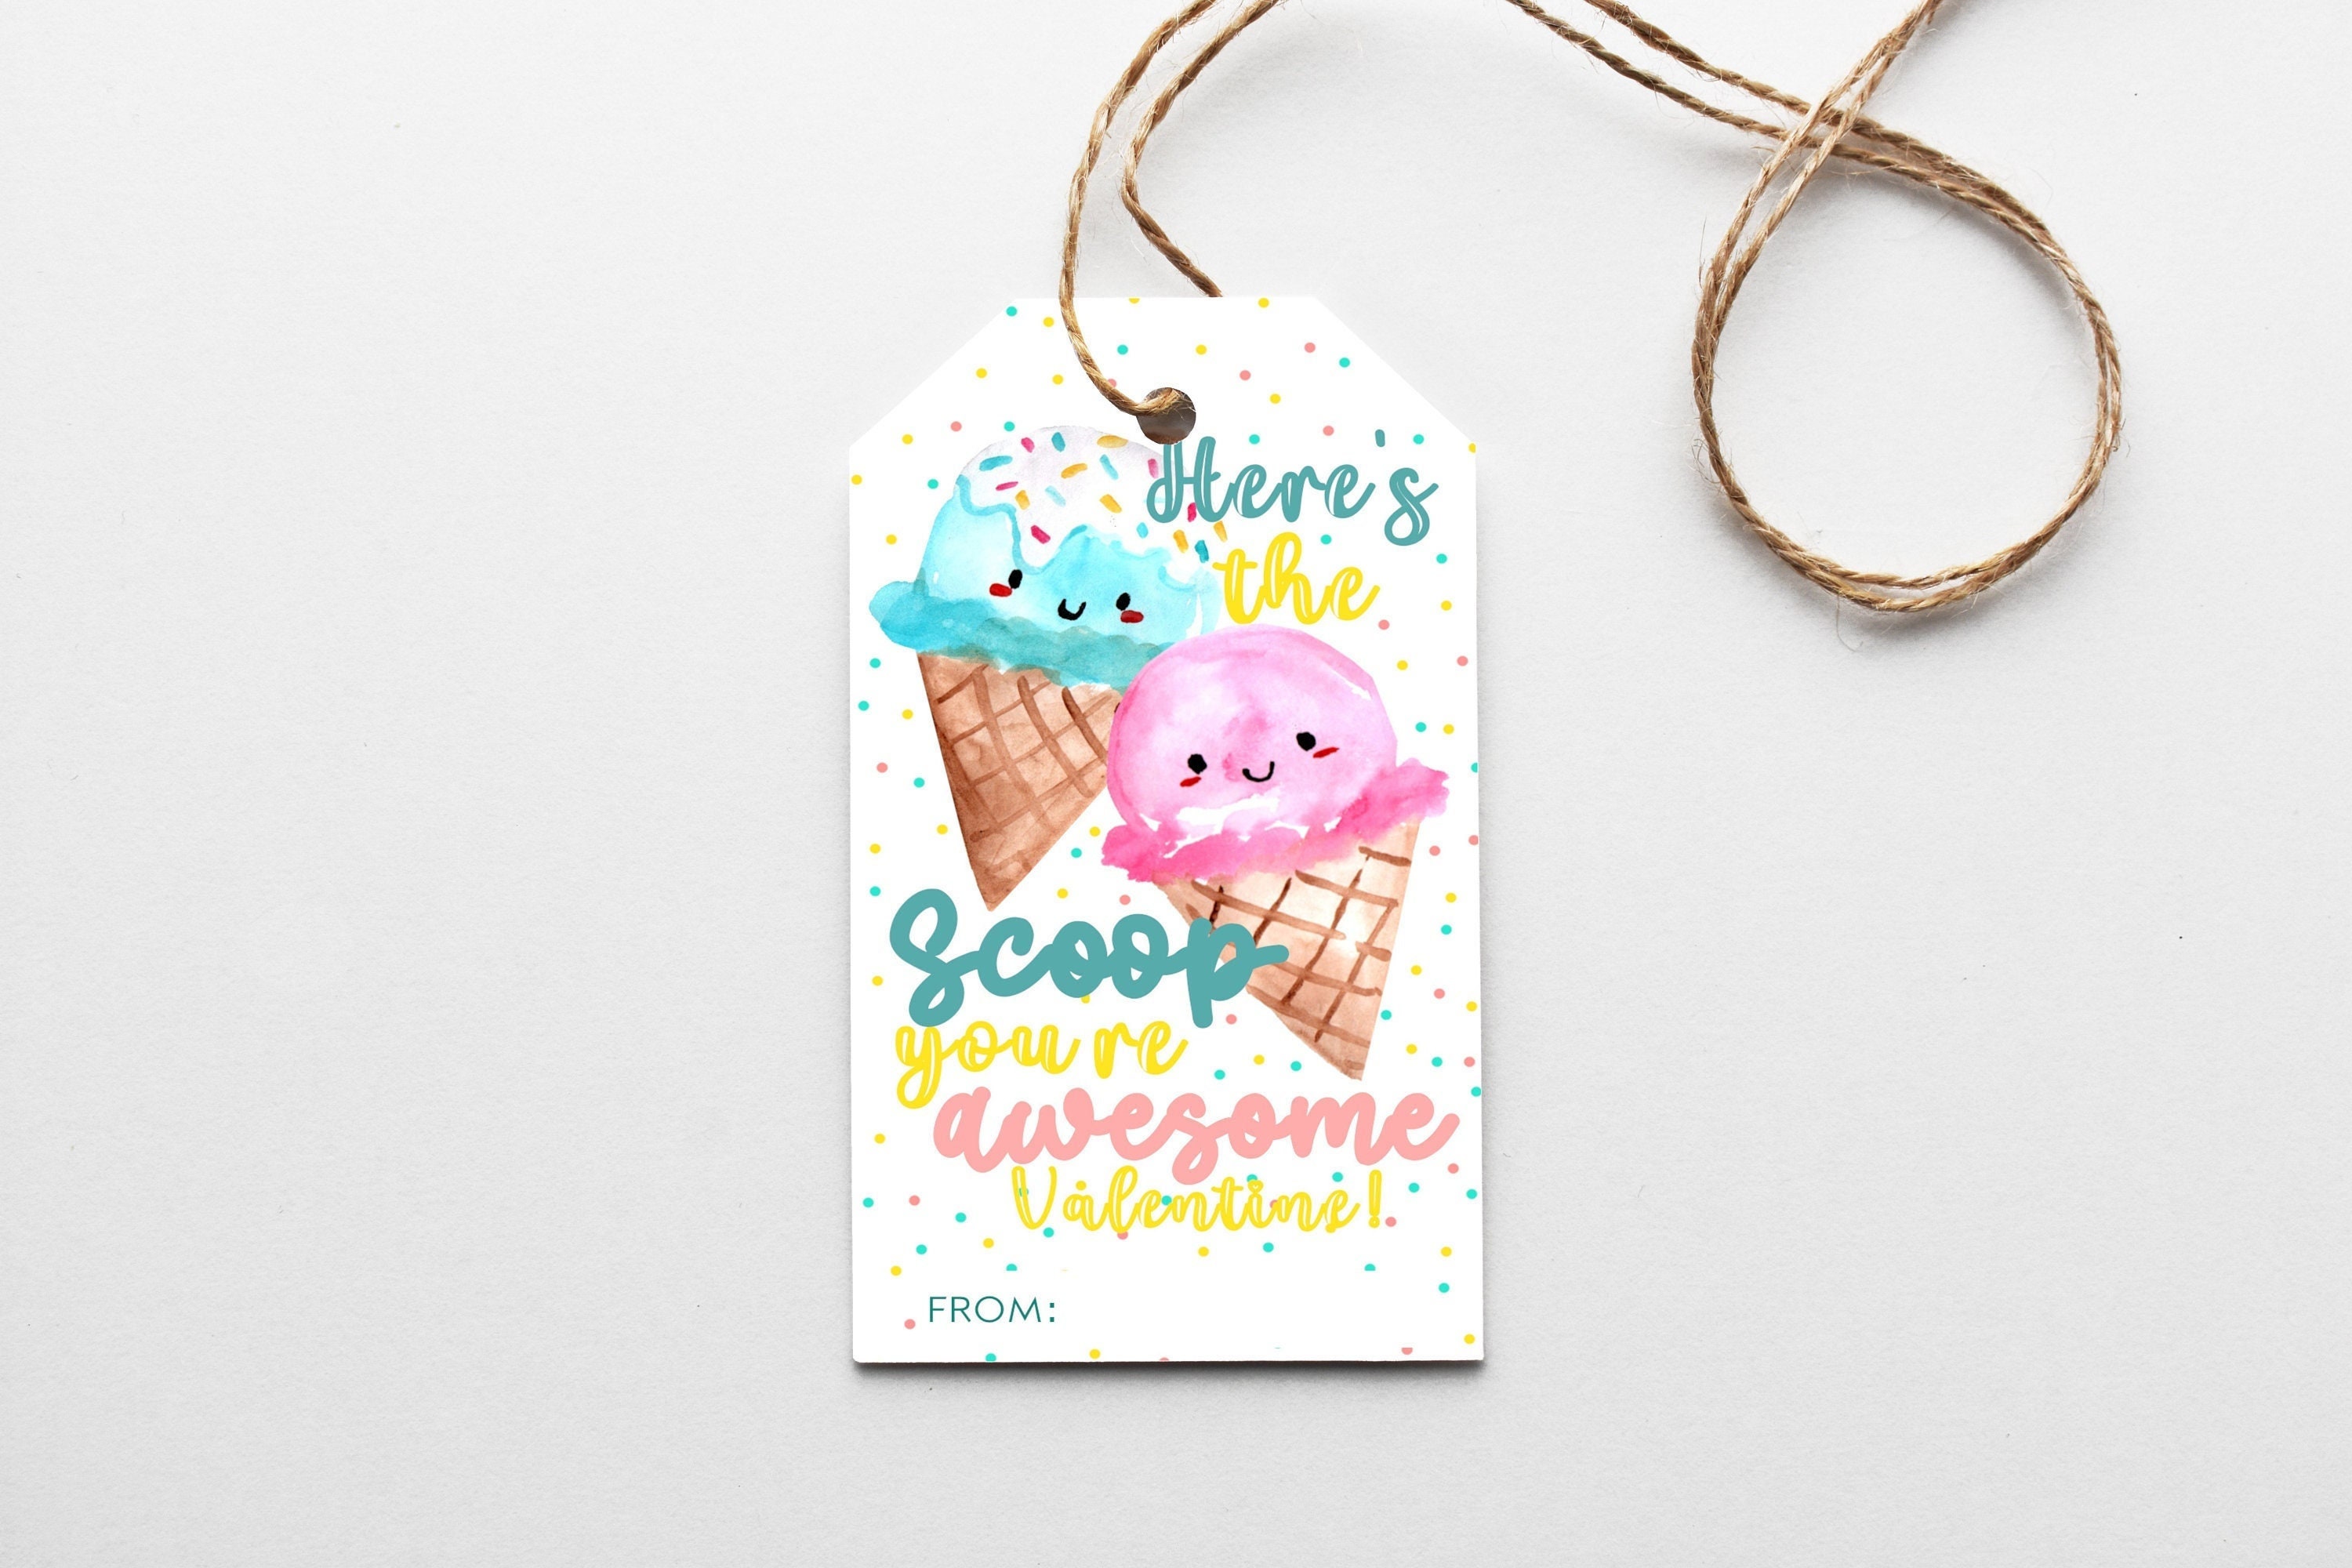 Ice Cream Thank You Favor Tags - Ice Cream Party Favors - Decor –  CraftyKizzy